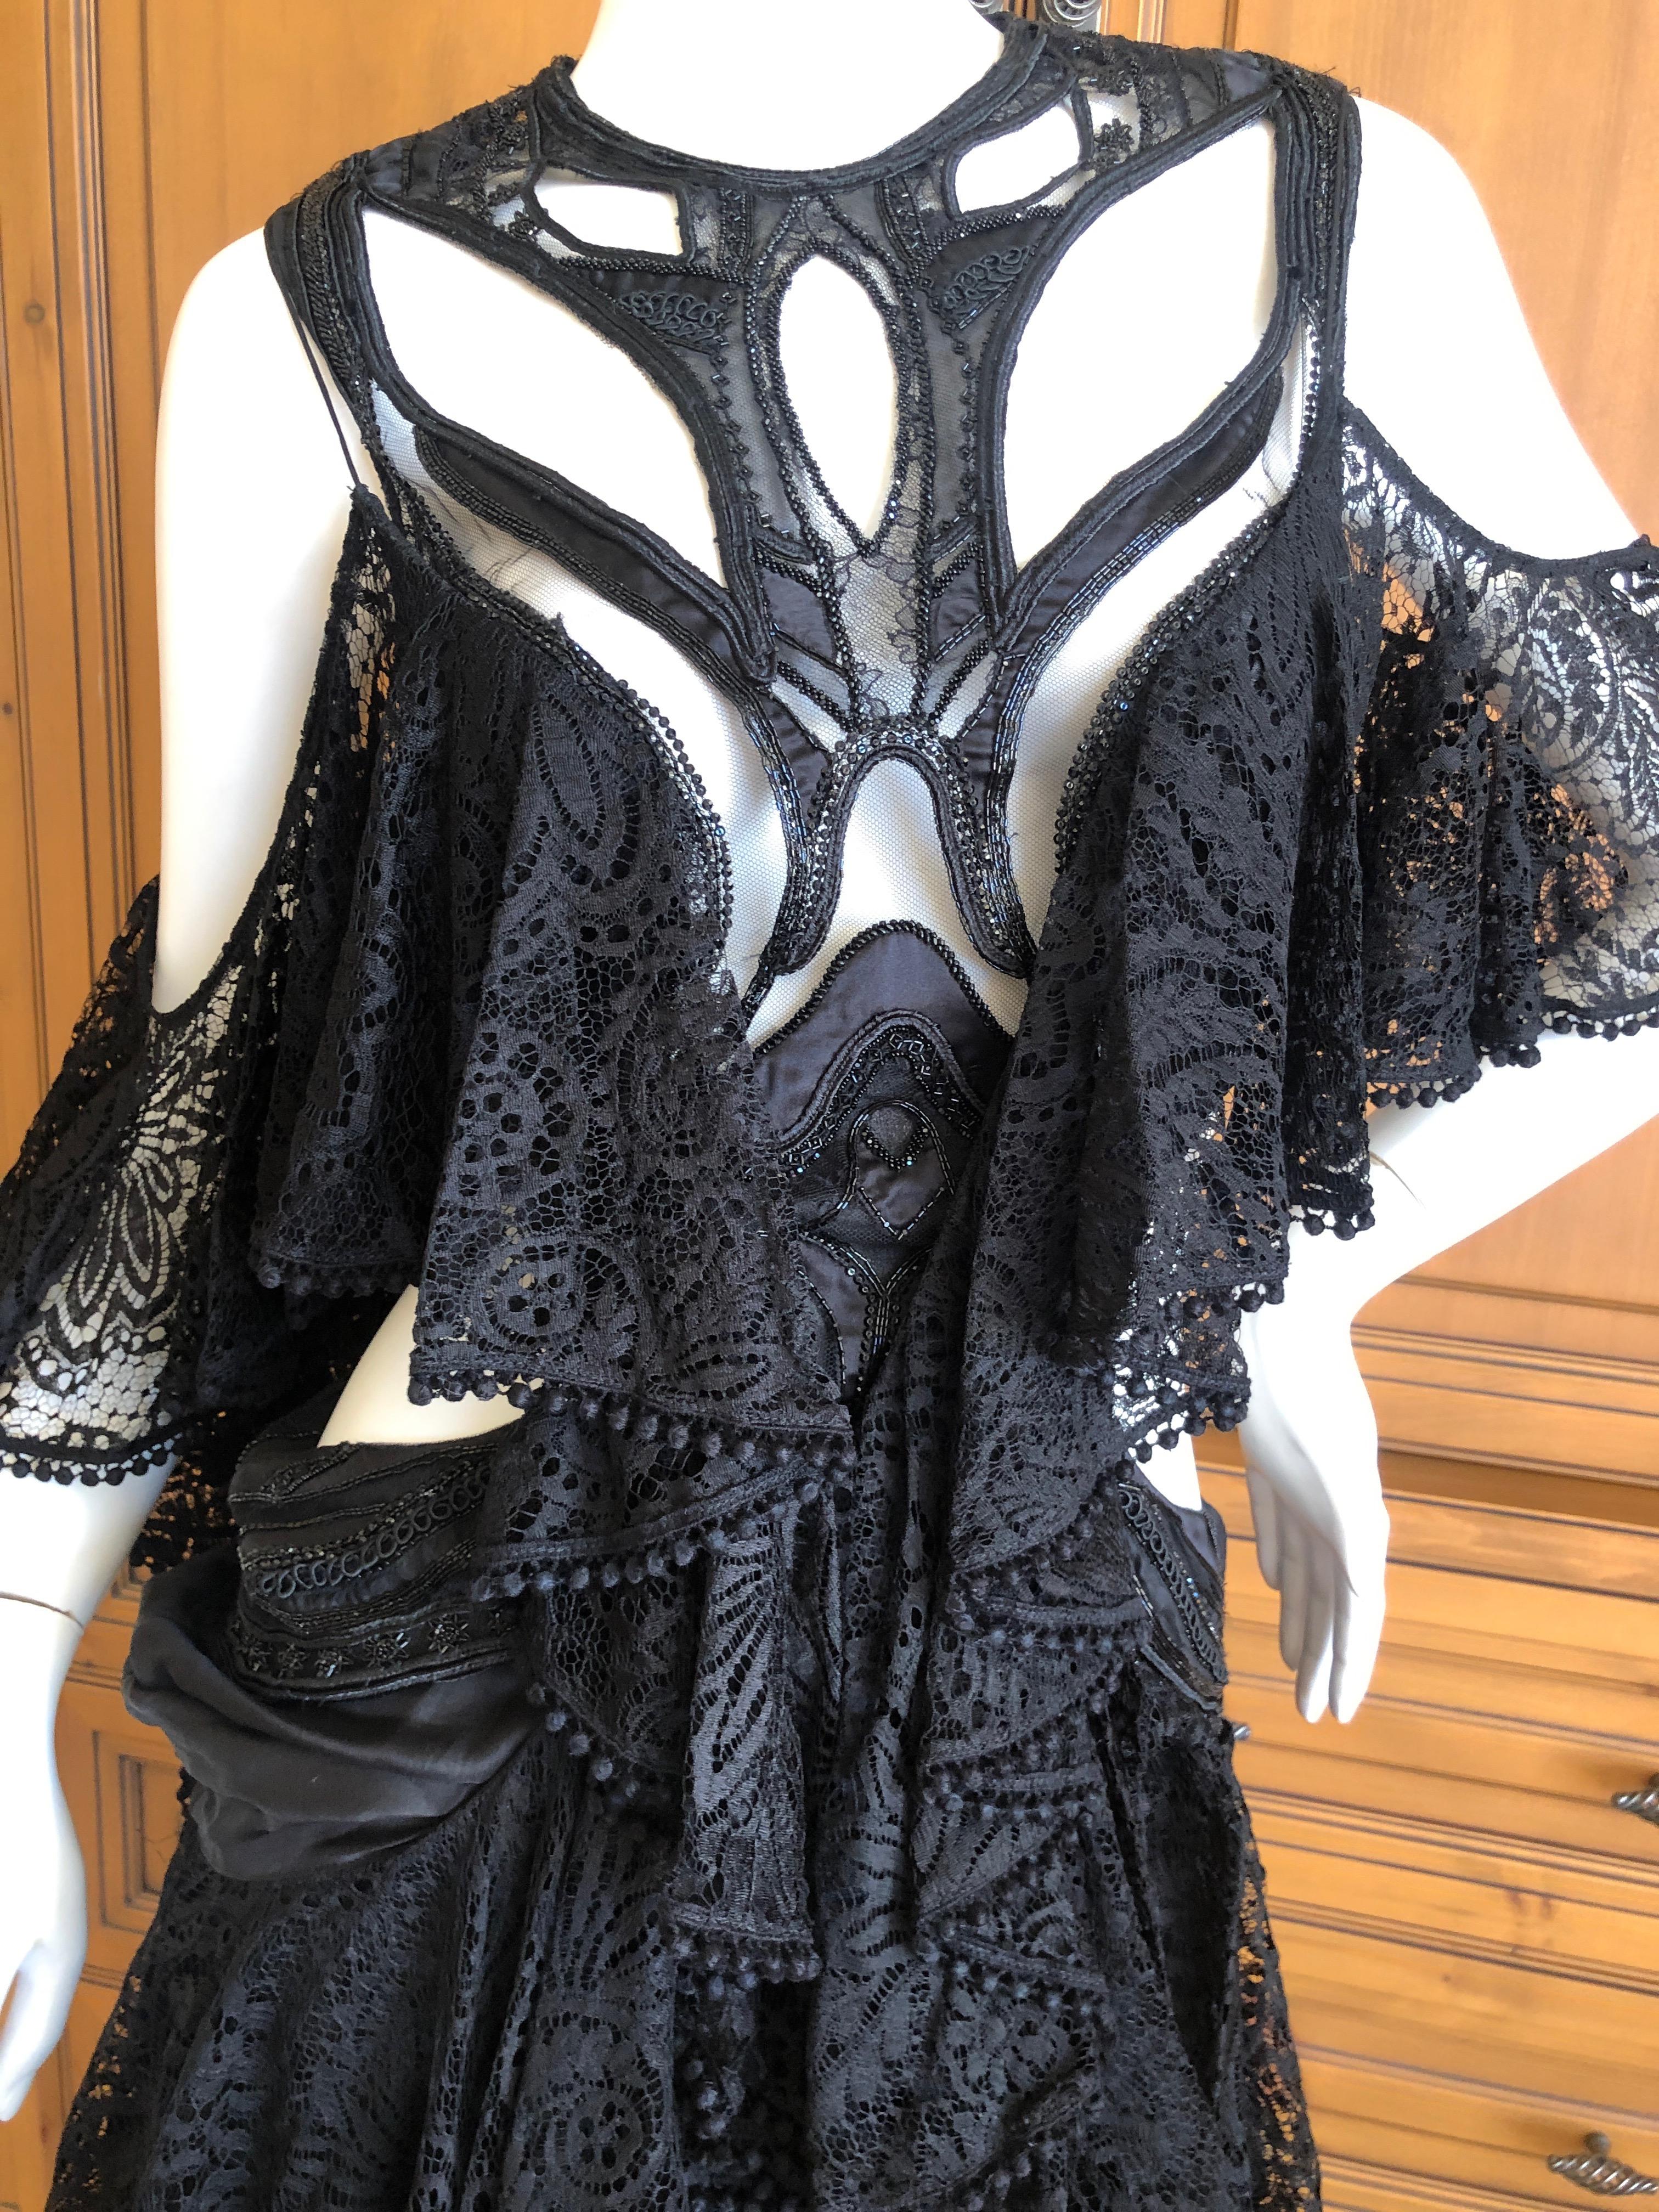 Alexander McQueen Pre Fall 2018 Goth Black Lace Beaded Dress by Sarah Burton In Excellent Condition For Sale In Cloverdale, CA